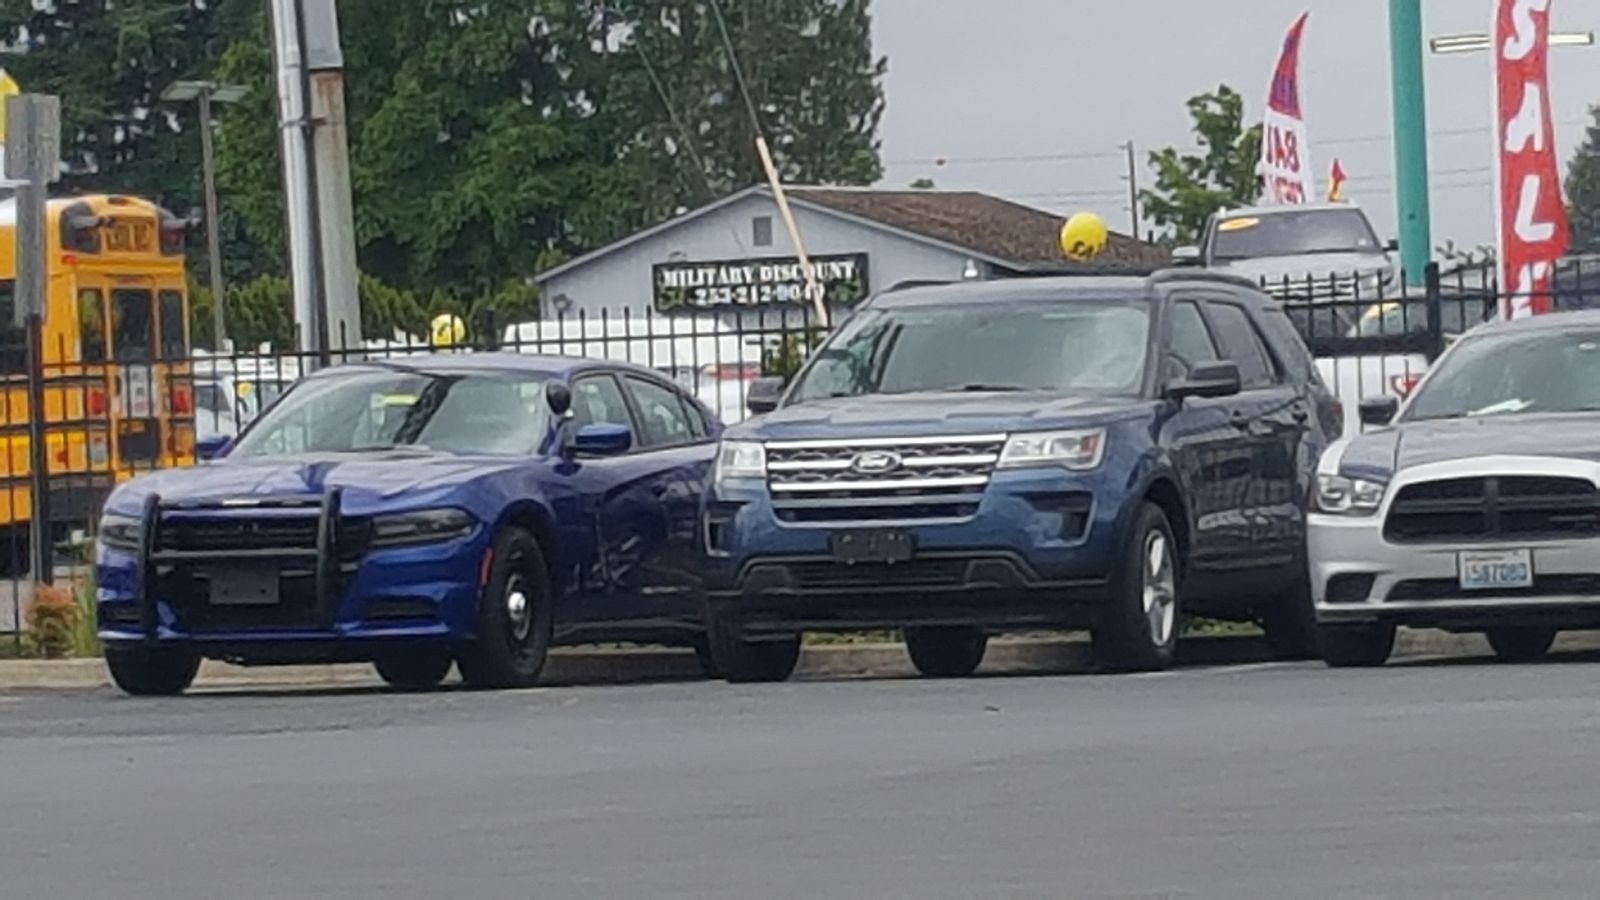 At Systems for Public Safety’s shop, some police vehicles.